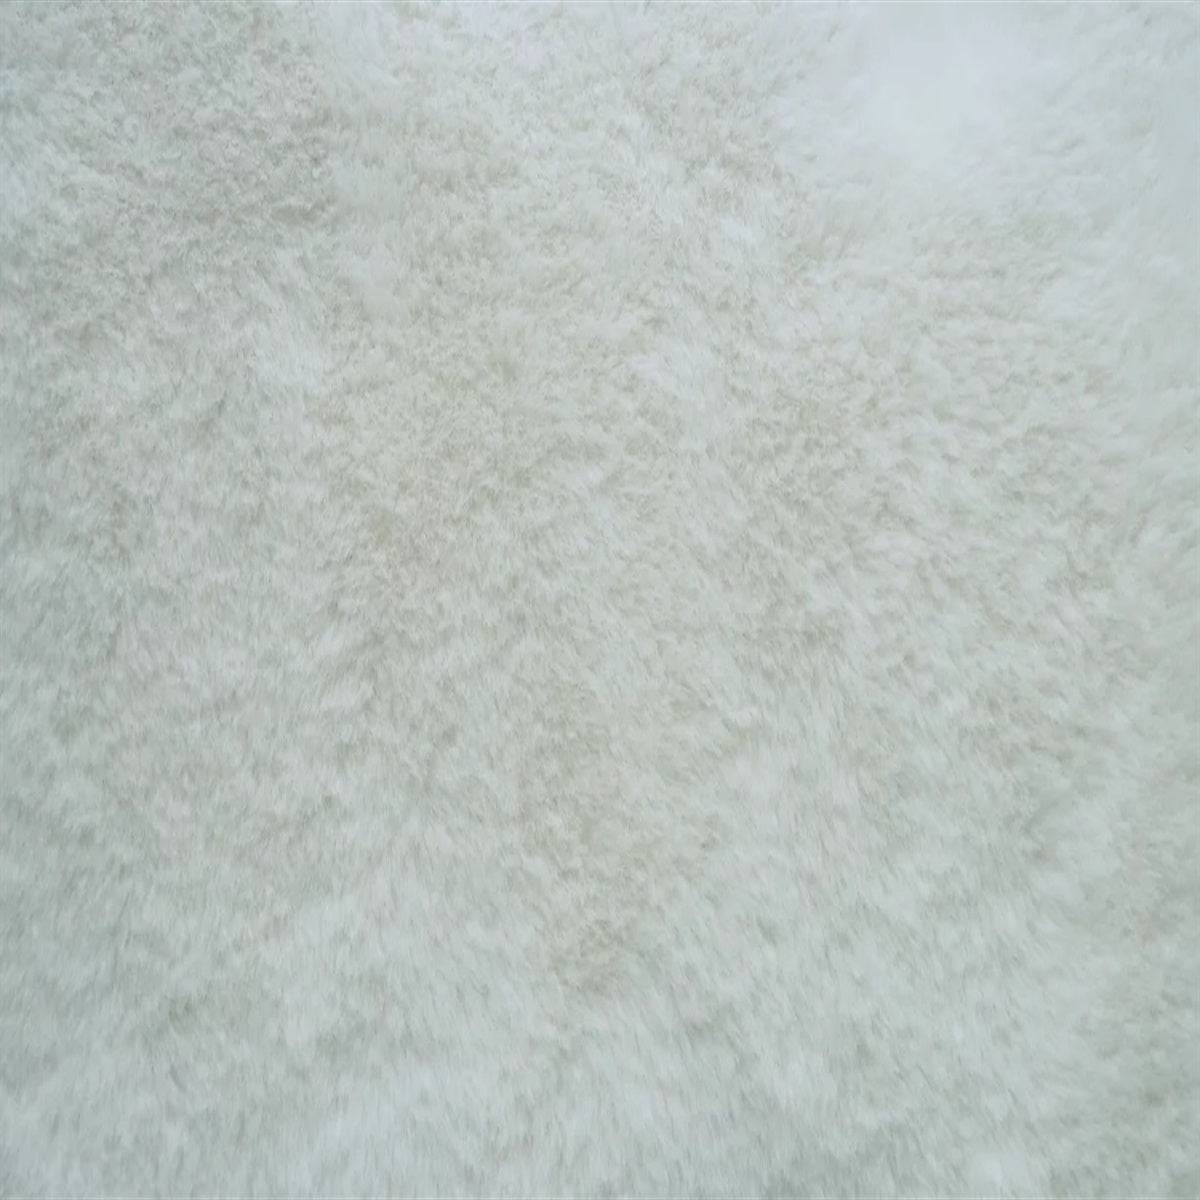 Bunny Thick Minky Fabric By The Roll (20 Yards)ICE FABRICSICE FABRICSWhiteBy The Yard (60 inches Wide)Bunny Thick Minky Fabric By The Roll (20 Yards) ICE FABRICS White